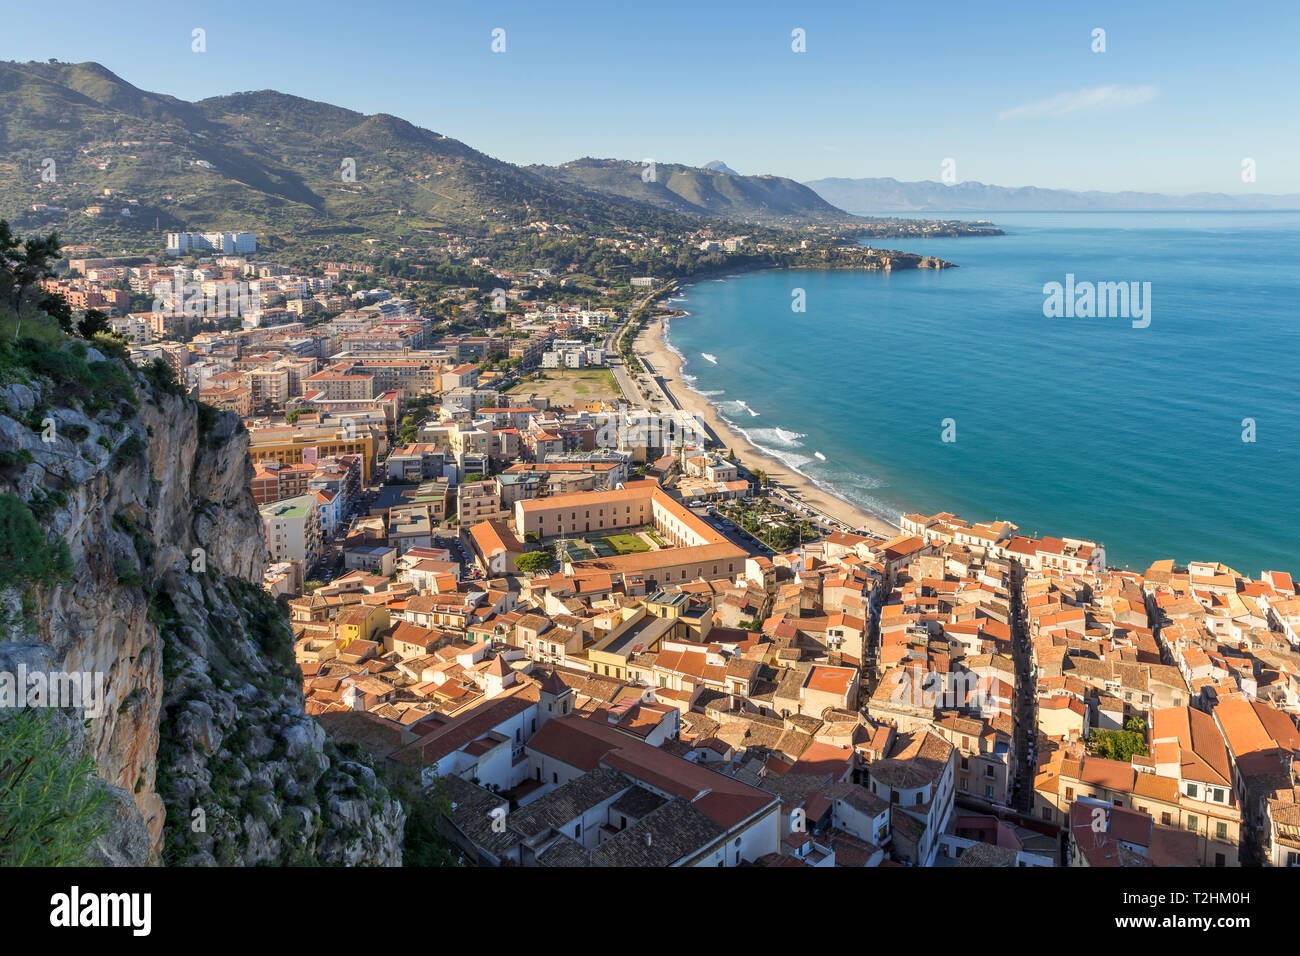 View from Rocca di Cefalu over the town and the beach, Cefalu, Sicily, Italy, Europe Stock Photo